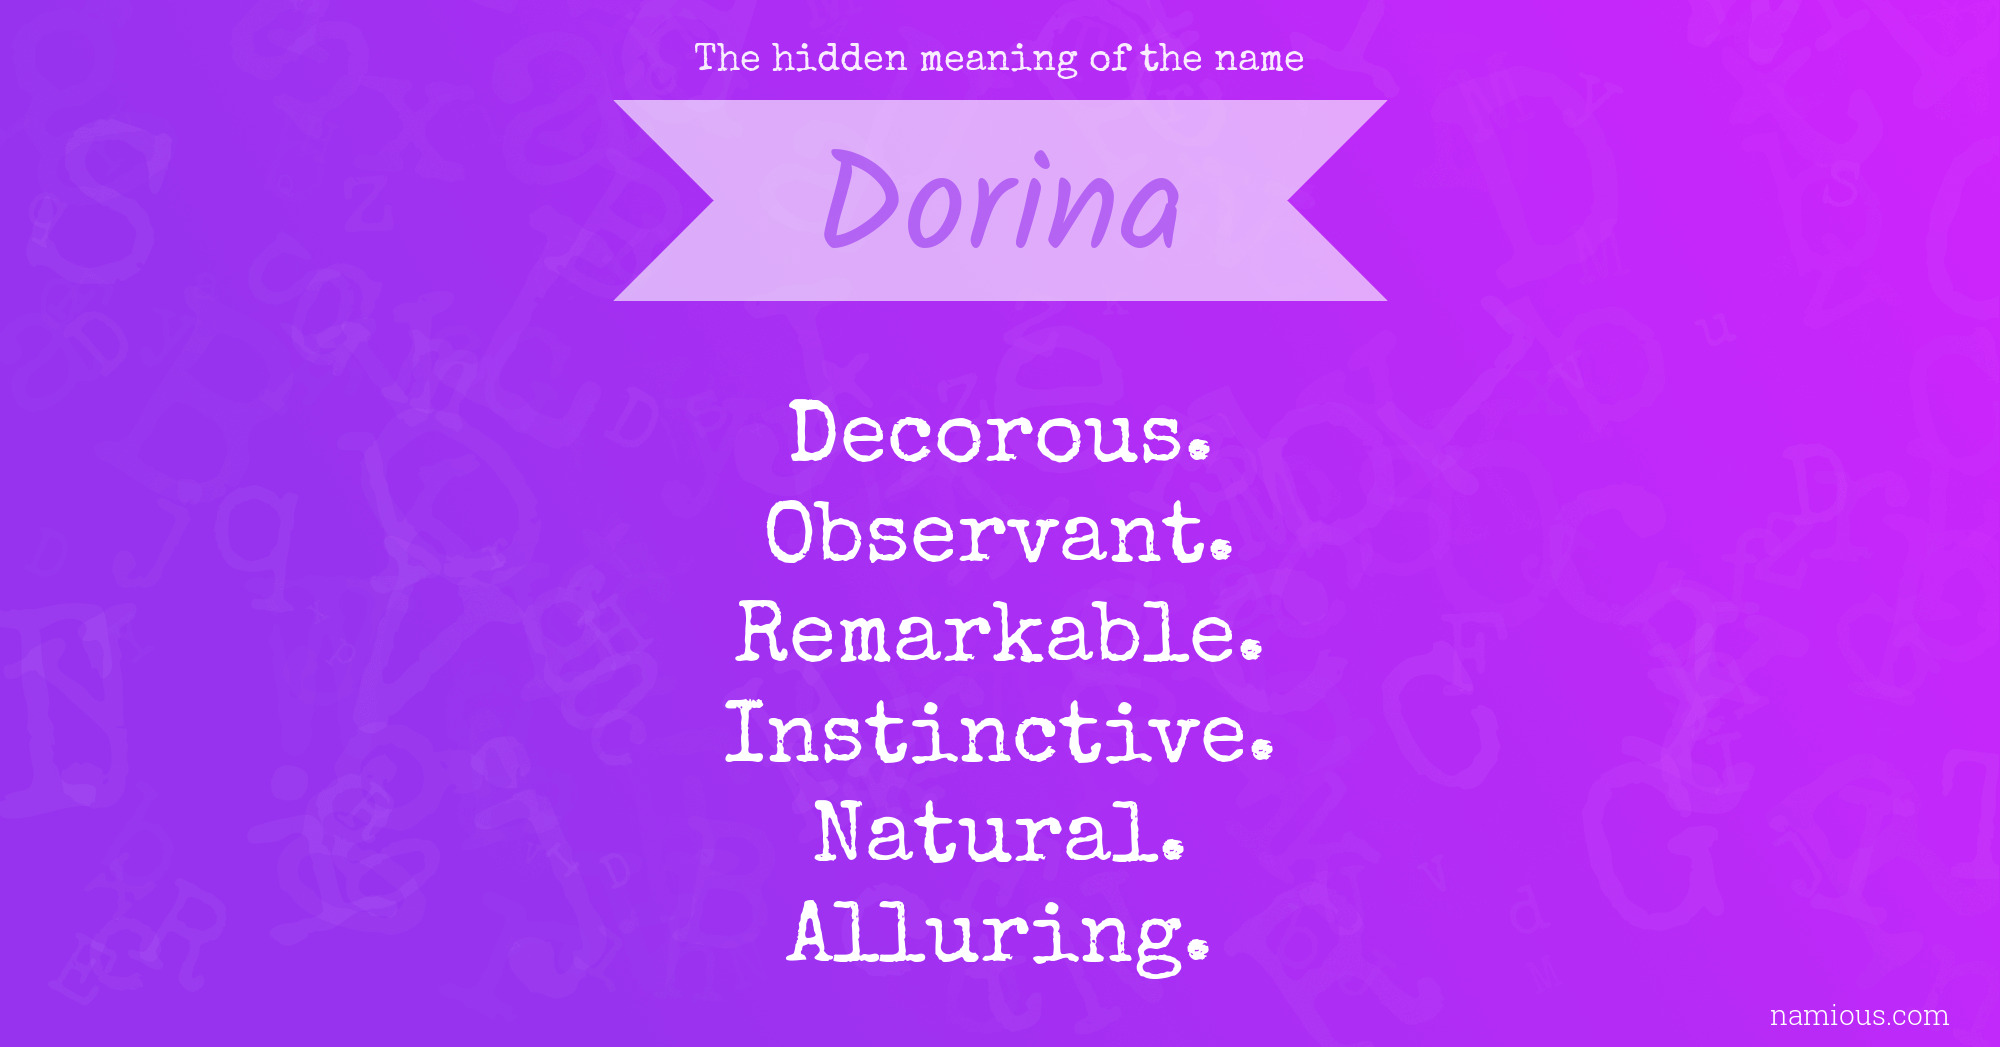 The hidden meaning of the name Dorina